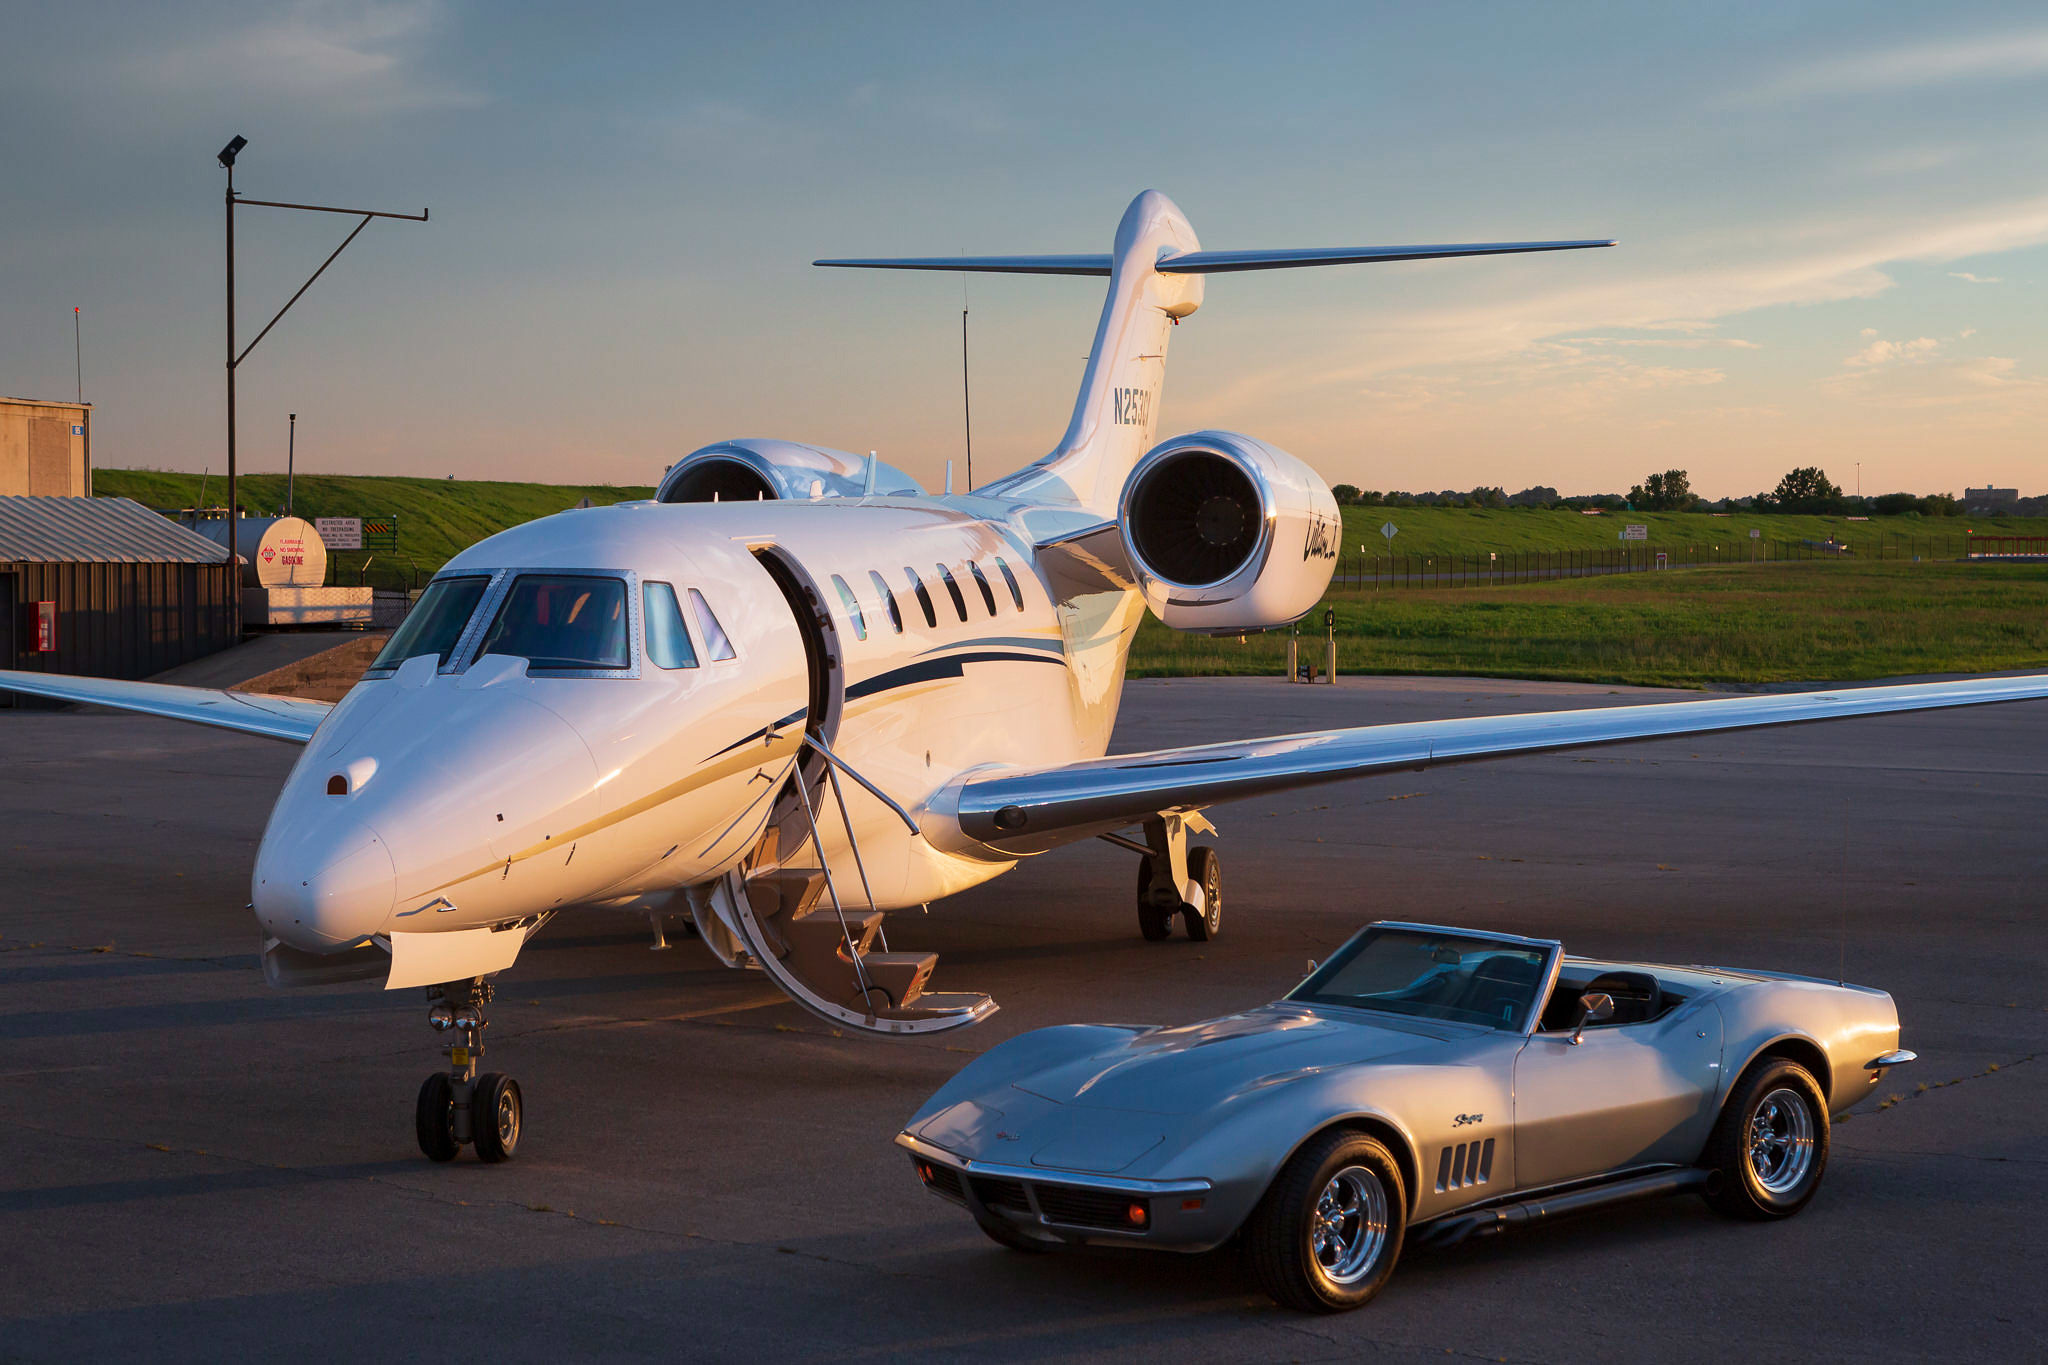 An image of a jet plane with a Corvette on the tarmac of an airport.